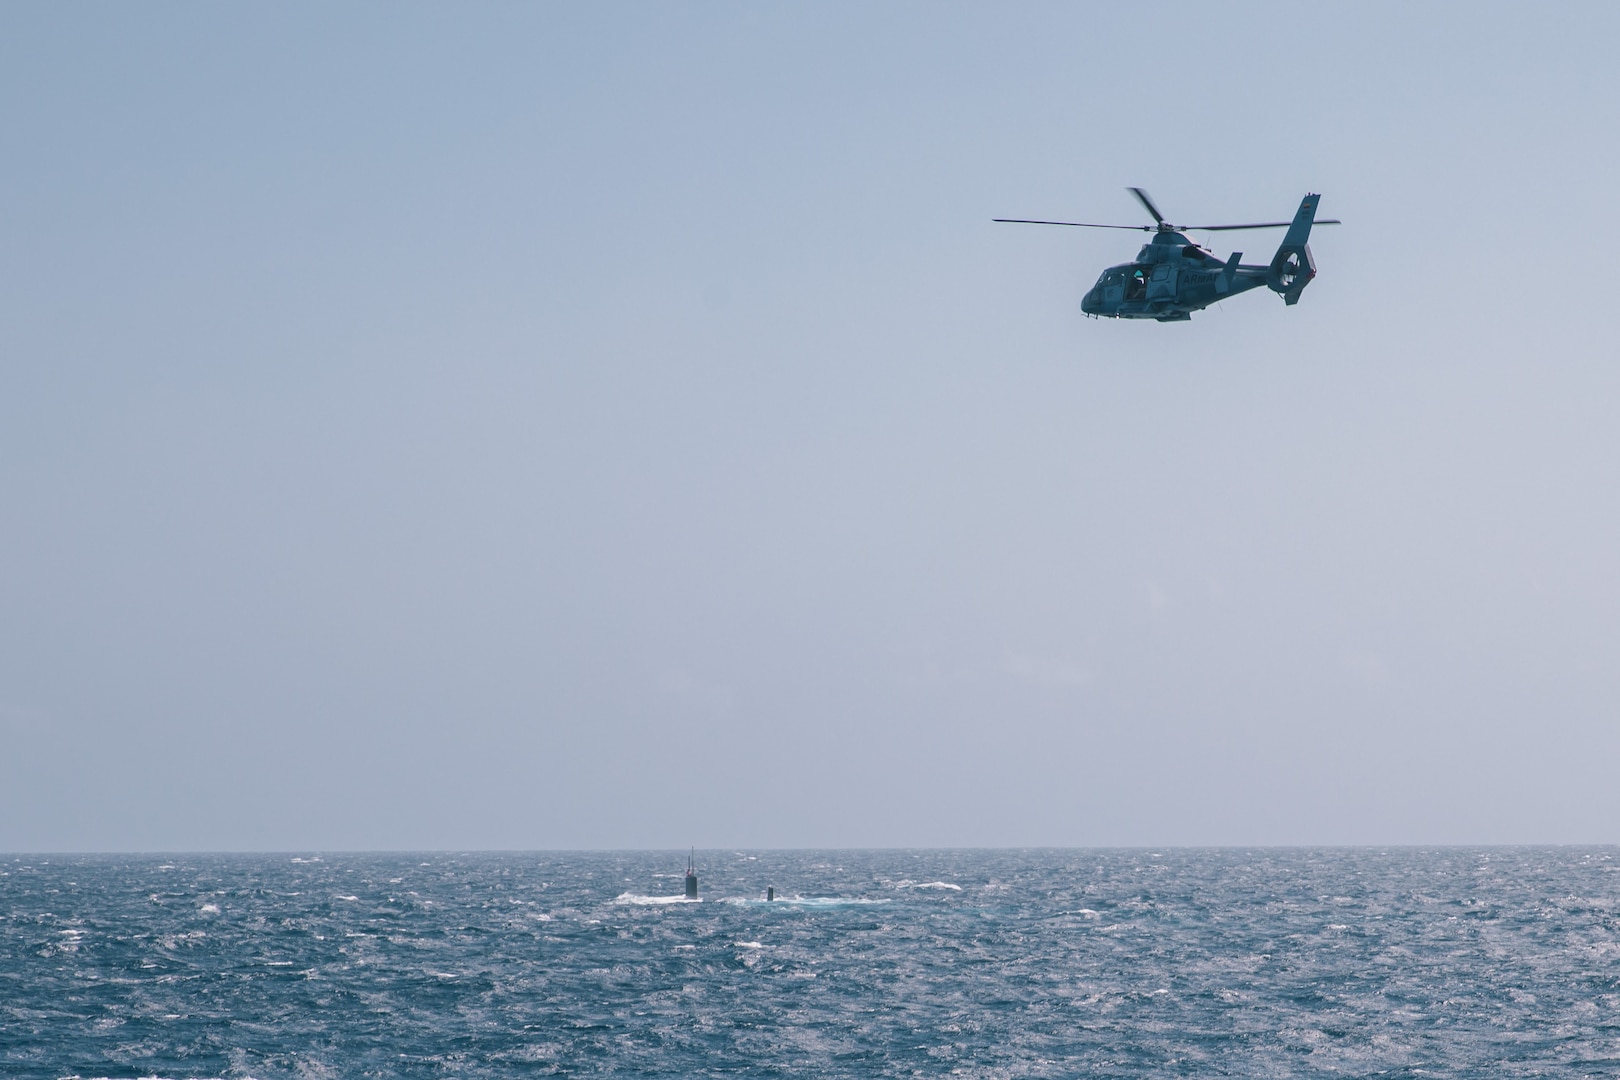 A military helicopter flies over the Virginia-class fast attack submarine USS Minnesota (SSN 783) during a bilateral anti-submarine warfare exercise with the Colombian navy, Feb. 27, 2022.